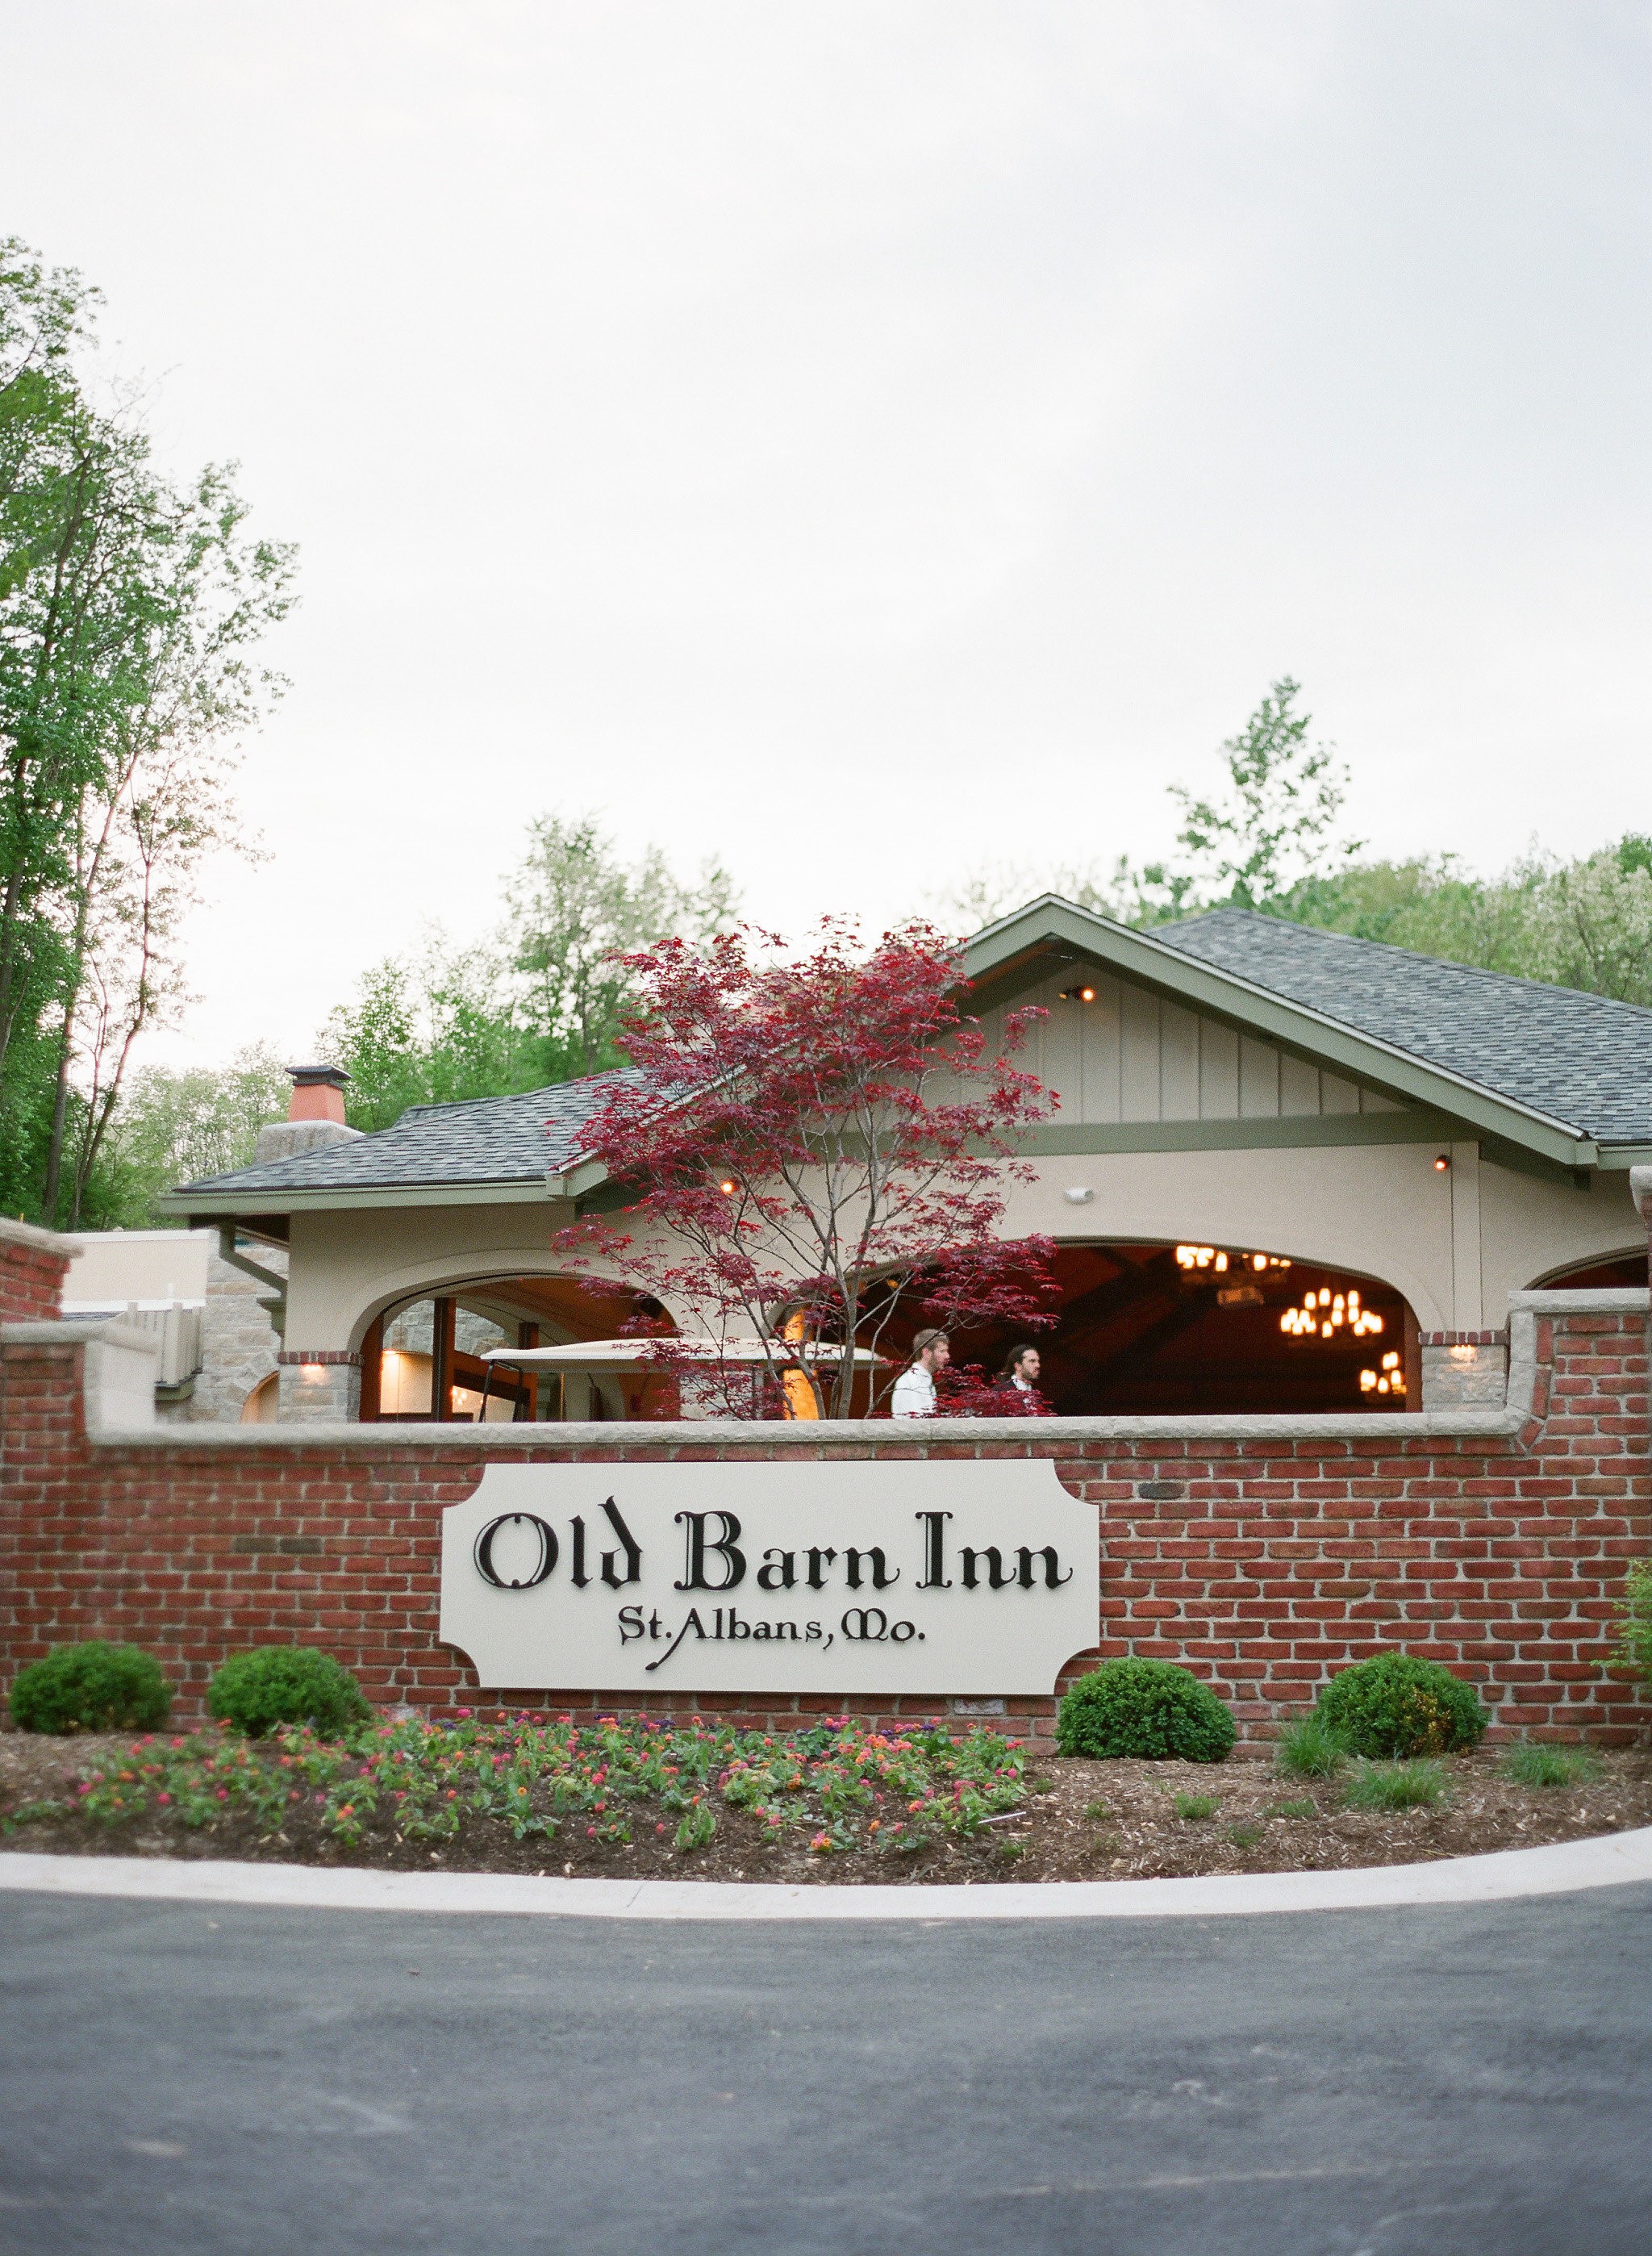 Nestled on acres of scenic rolling hills near the Missouri River, The Inns offers high-end hospitality and service in a beautiful country atmosphere.